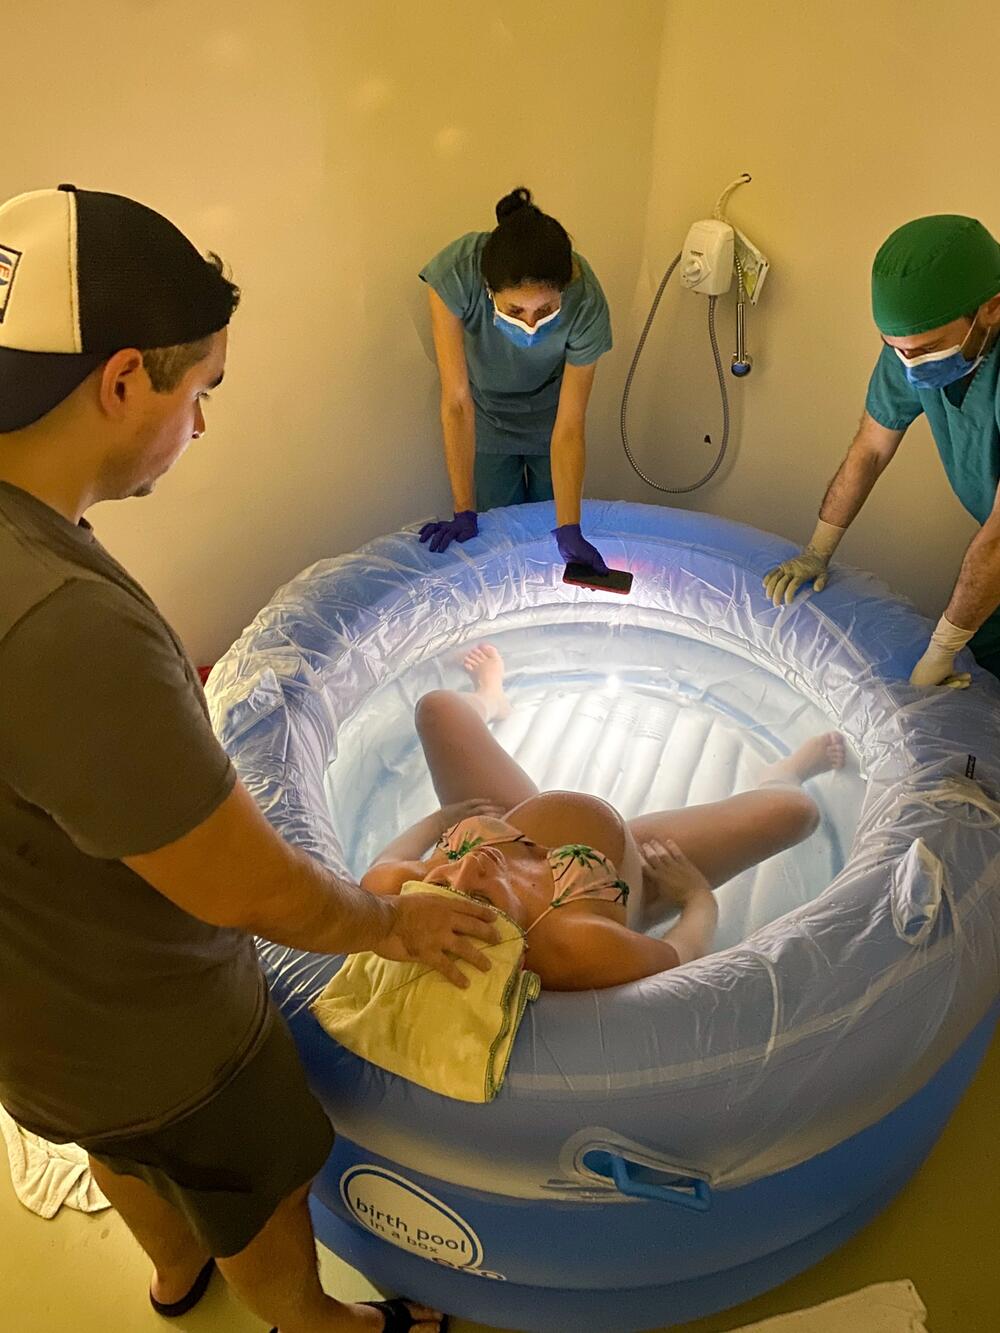 A pregnant woman in a birthing pool with a man outside behind her and two health-care workers in front